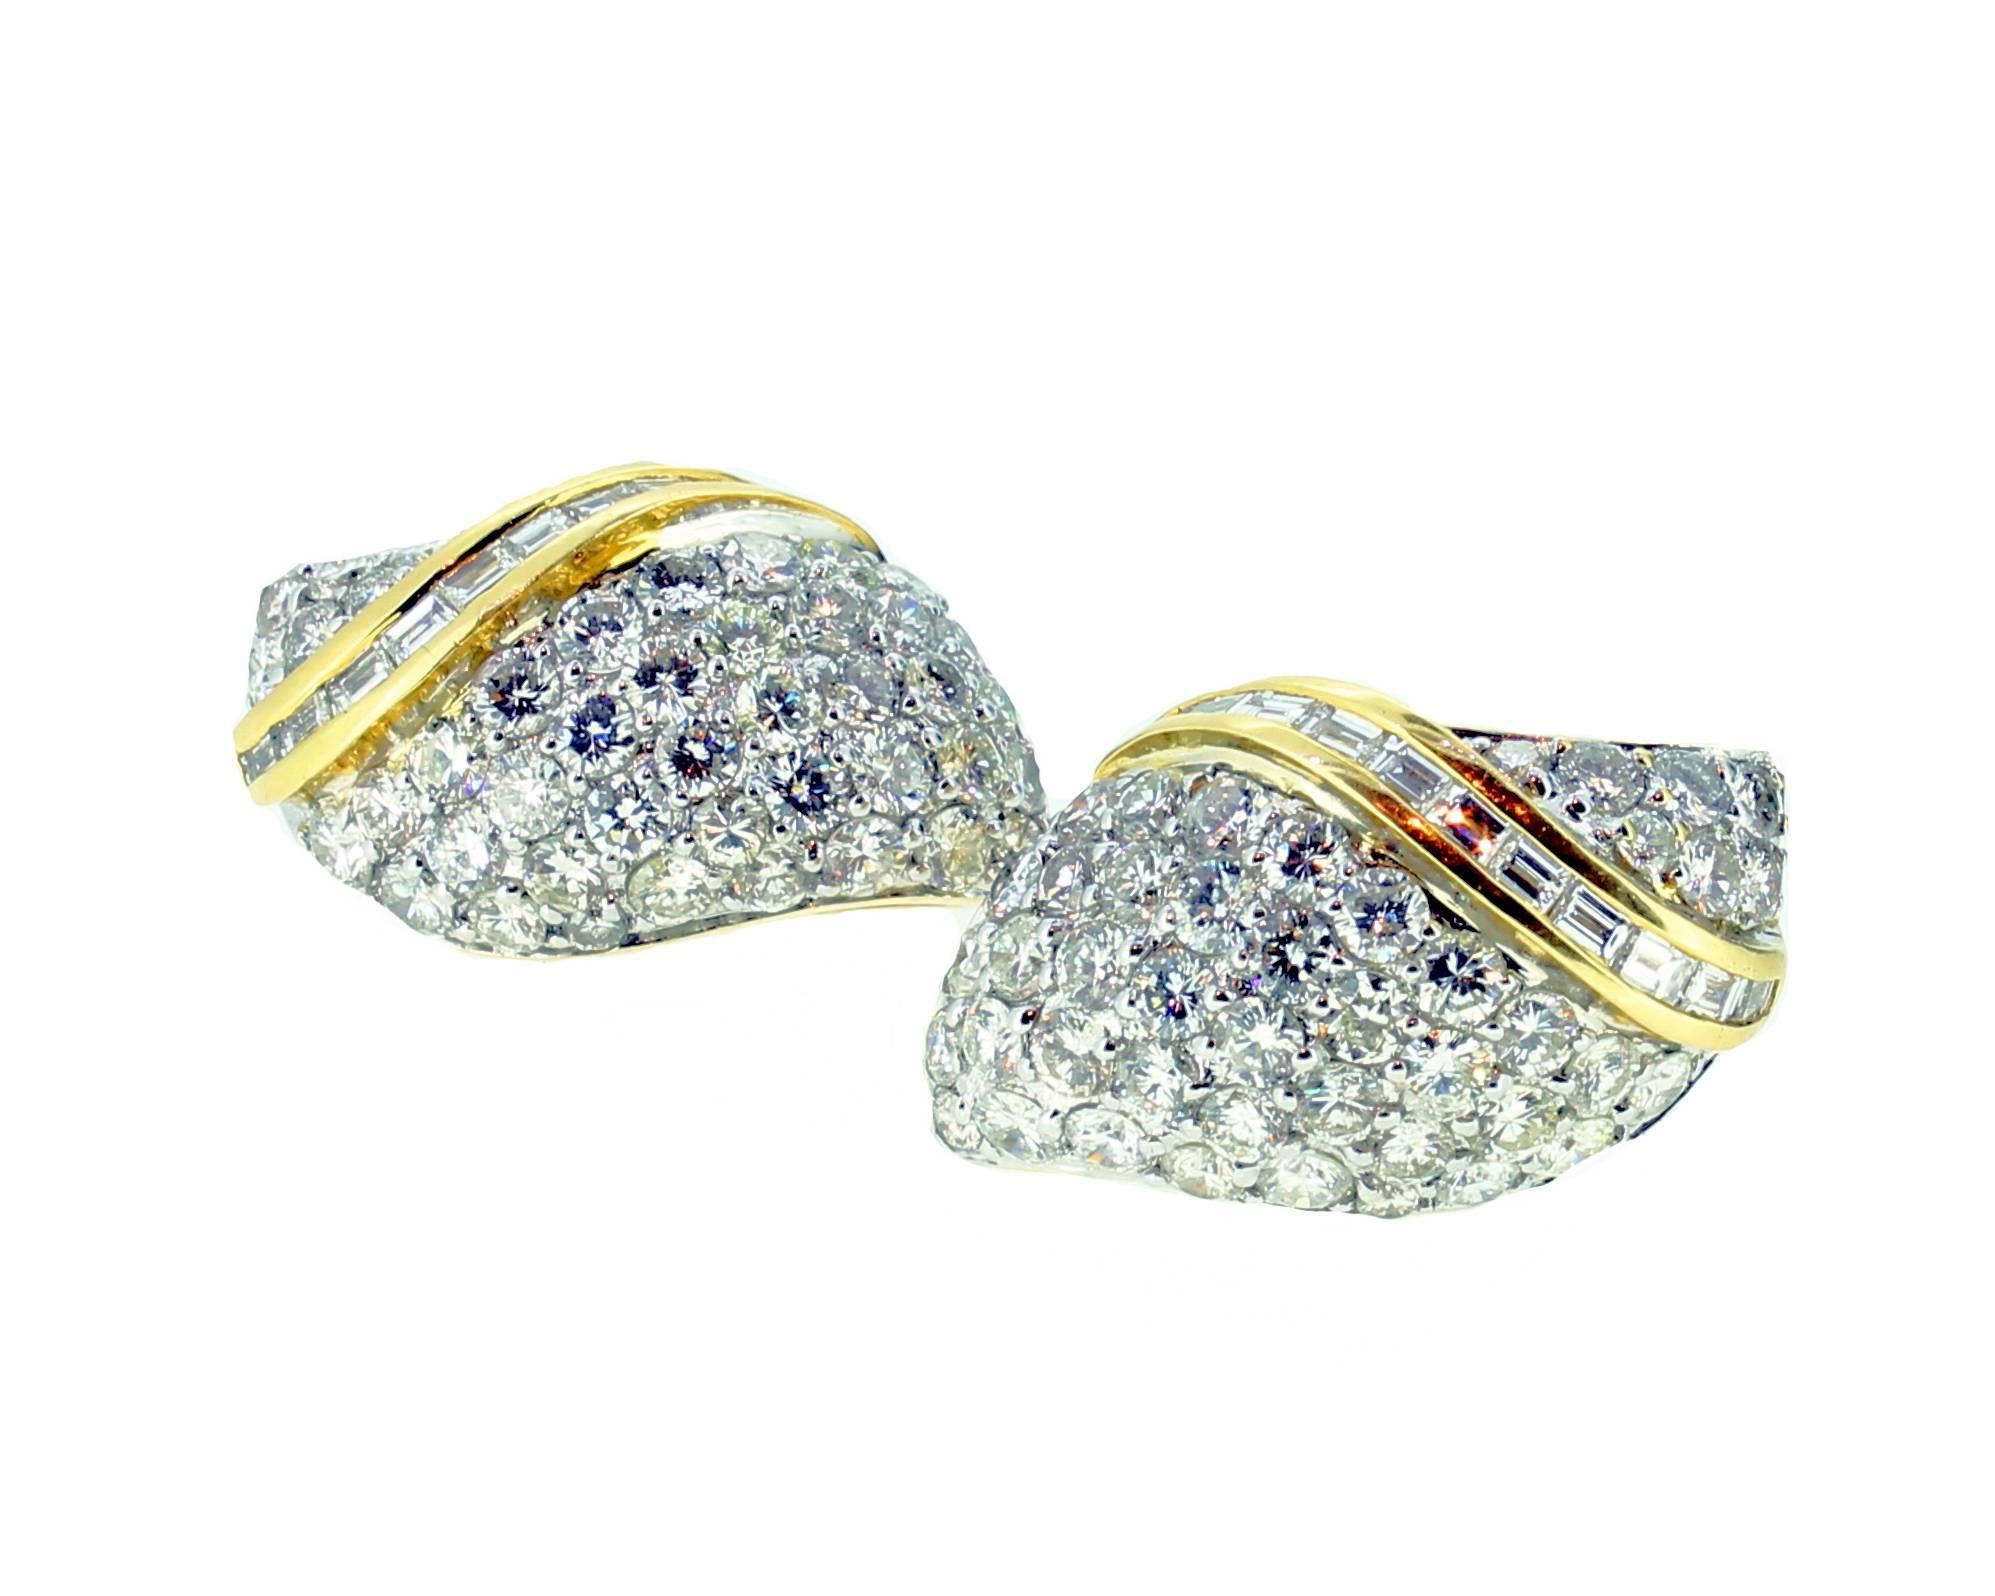 Marcus & Co Pave set diamond earclips mounted in 18ct white and yellow gold. American. Circa 1980. The central pave set white gold diamond sections split by a scrolling 18ct yellow gold baguatte cut diamond section. Marked 750. With